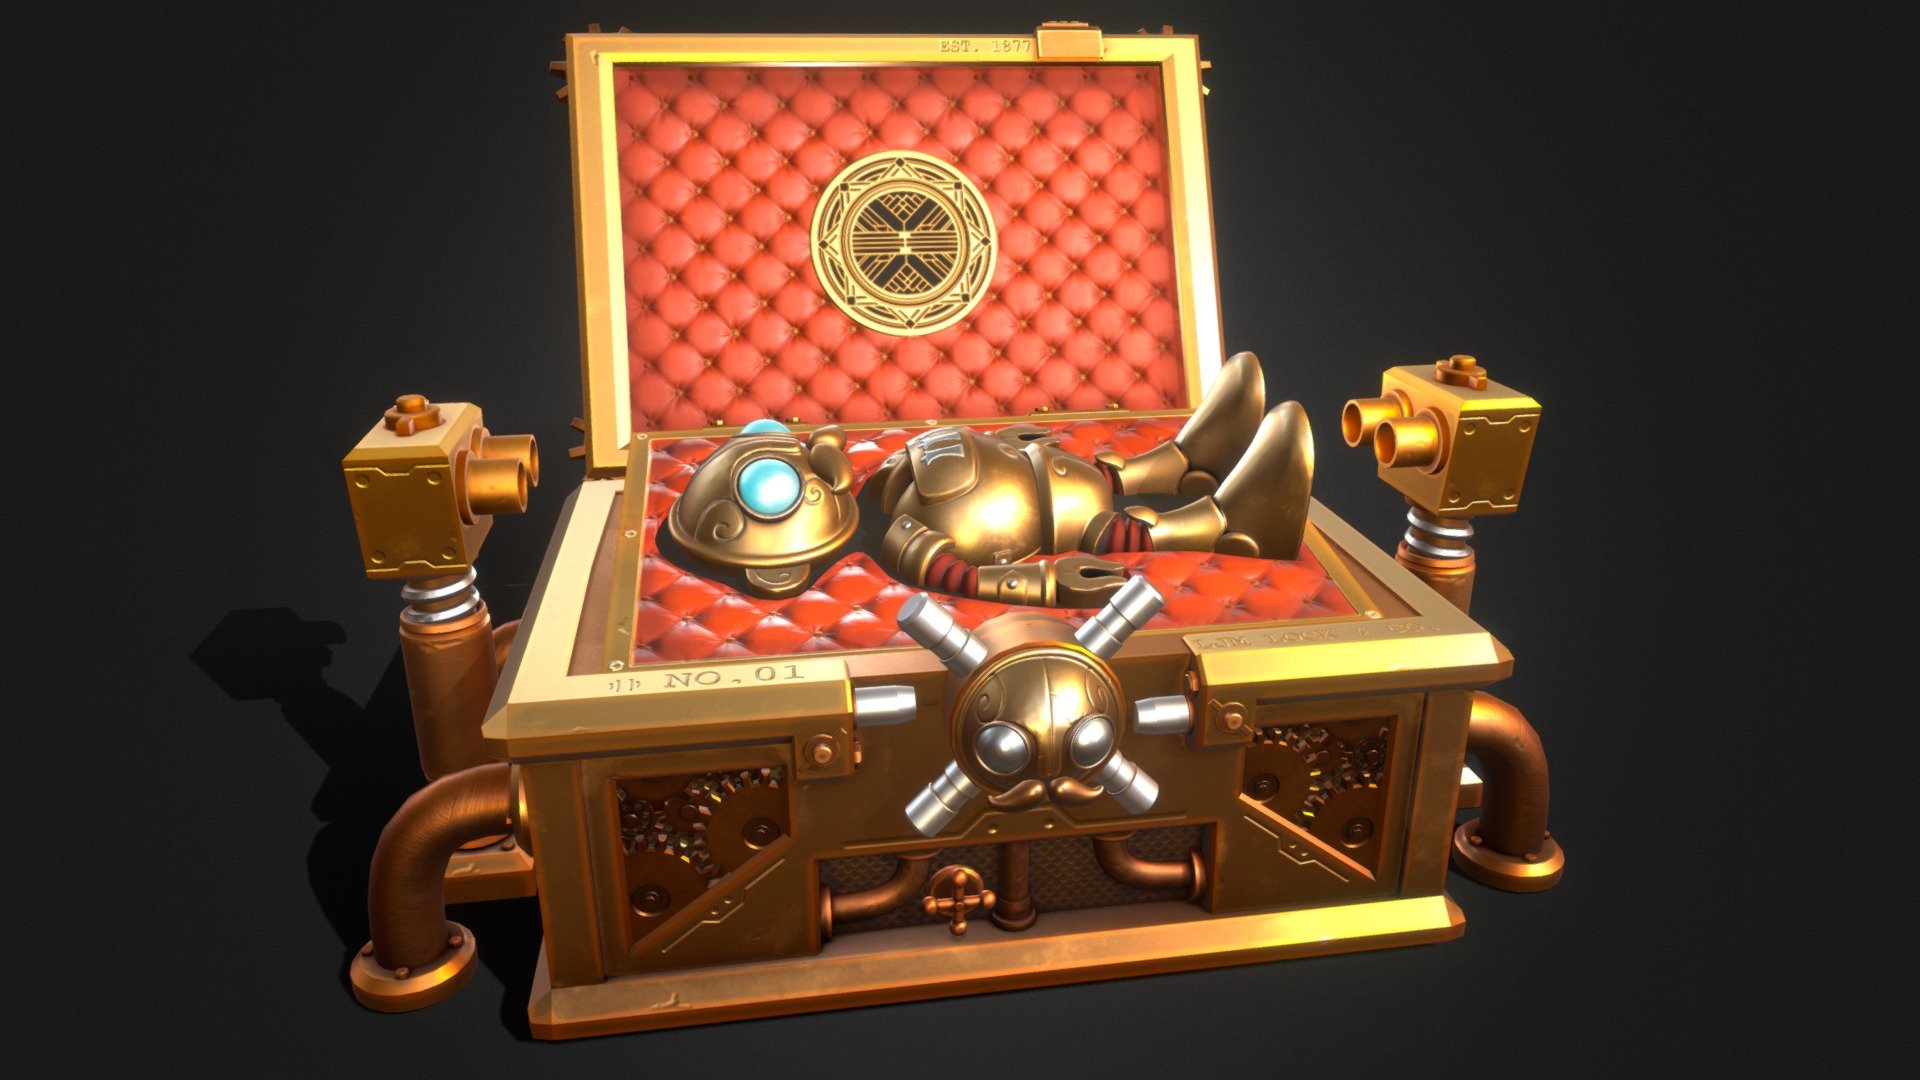 The renowned Inventor had this vault custom built to keep his latest, most advanced creation hidden from prying eyes&hellip; 





My Entry for the Treasure Chest Challenge




More shots over at https://www.artstation.com/artwork/ZGy5Bw




Robot based off Original Concept by https://www.artstation.com/gimaldinov


 - The Steampunk Vault - Download Free 3D model by Ljm 3D (@Ljm3D) 3d model